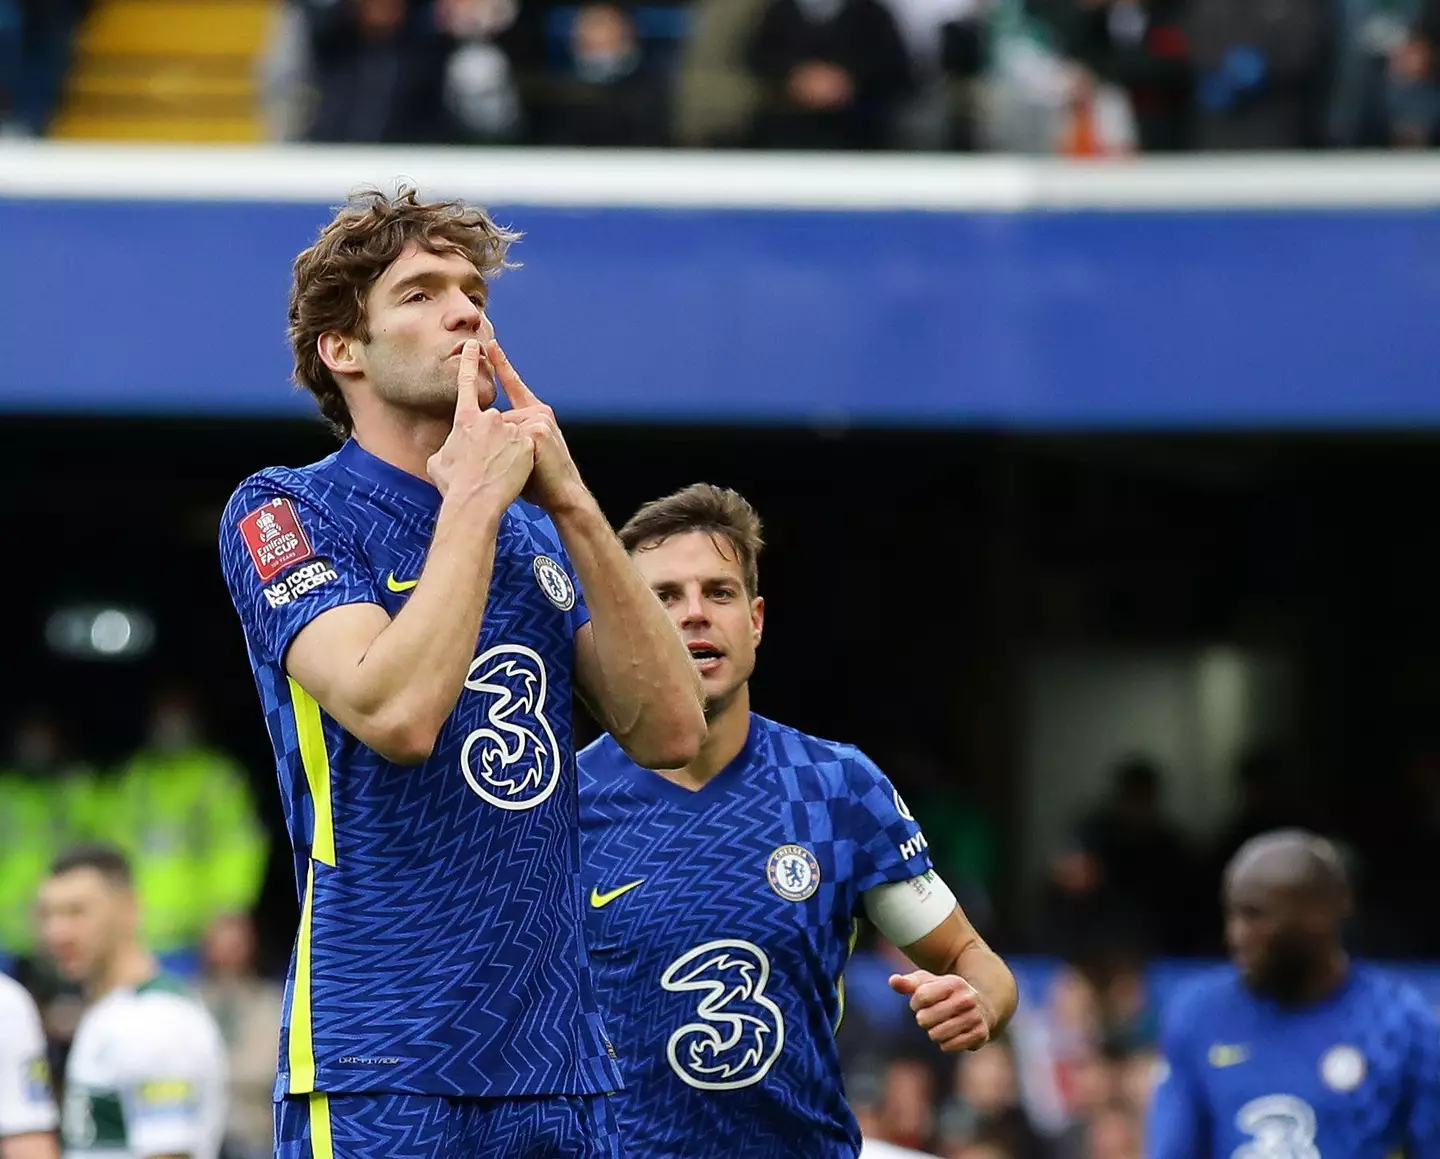 Marcos Alonso celebrates his goal against Plymouth Argyle in the FA Cup for Chelsea. (Alamy)